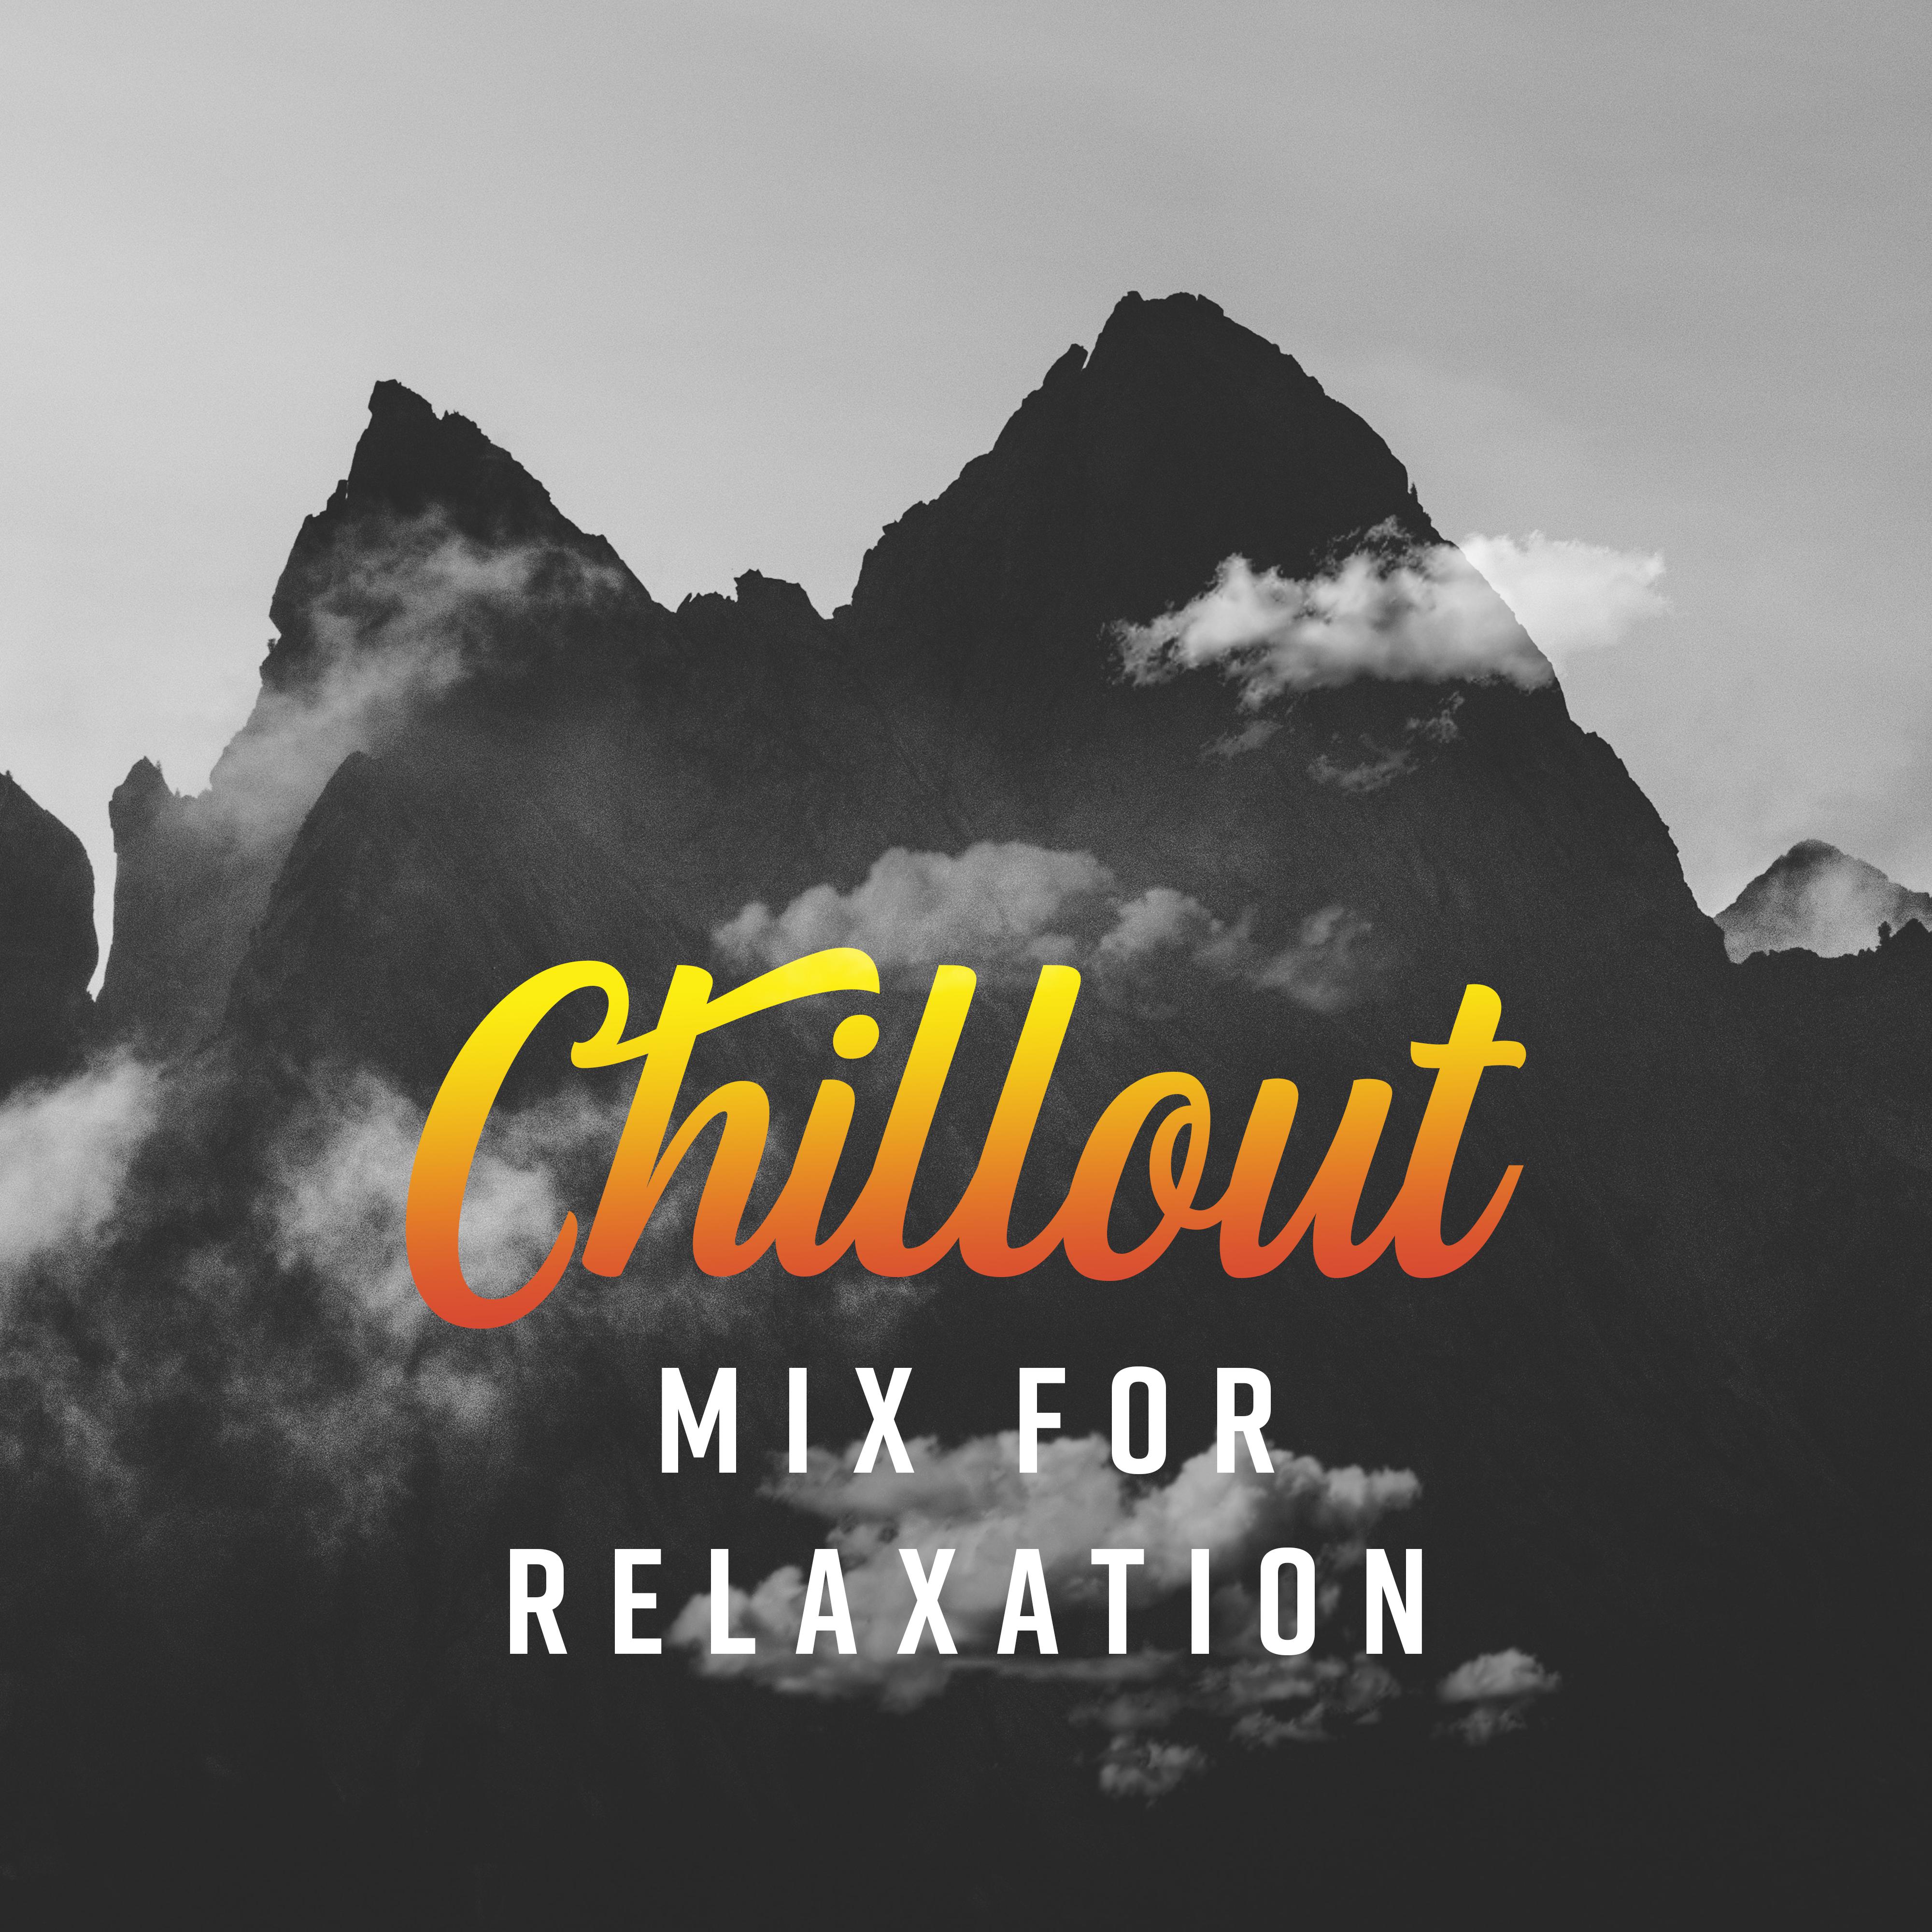 Chillout Mix for Relaxation